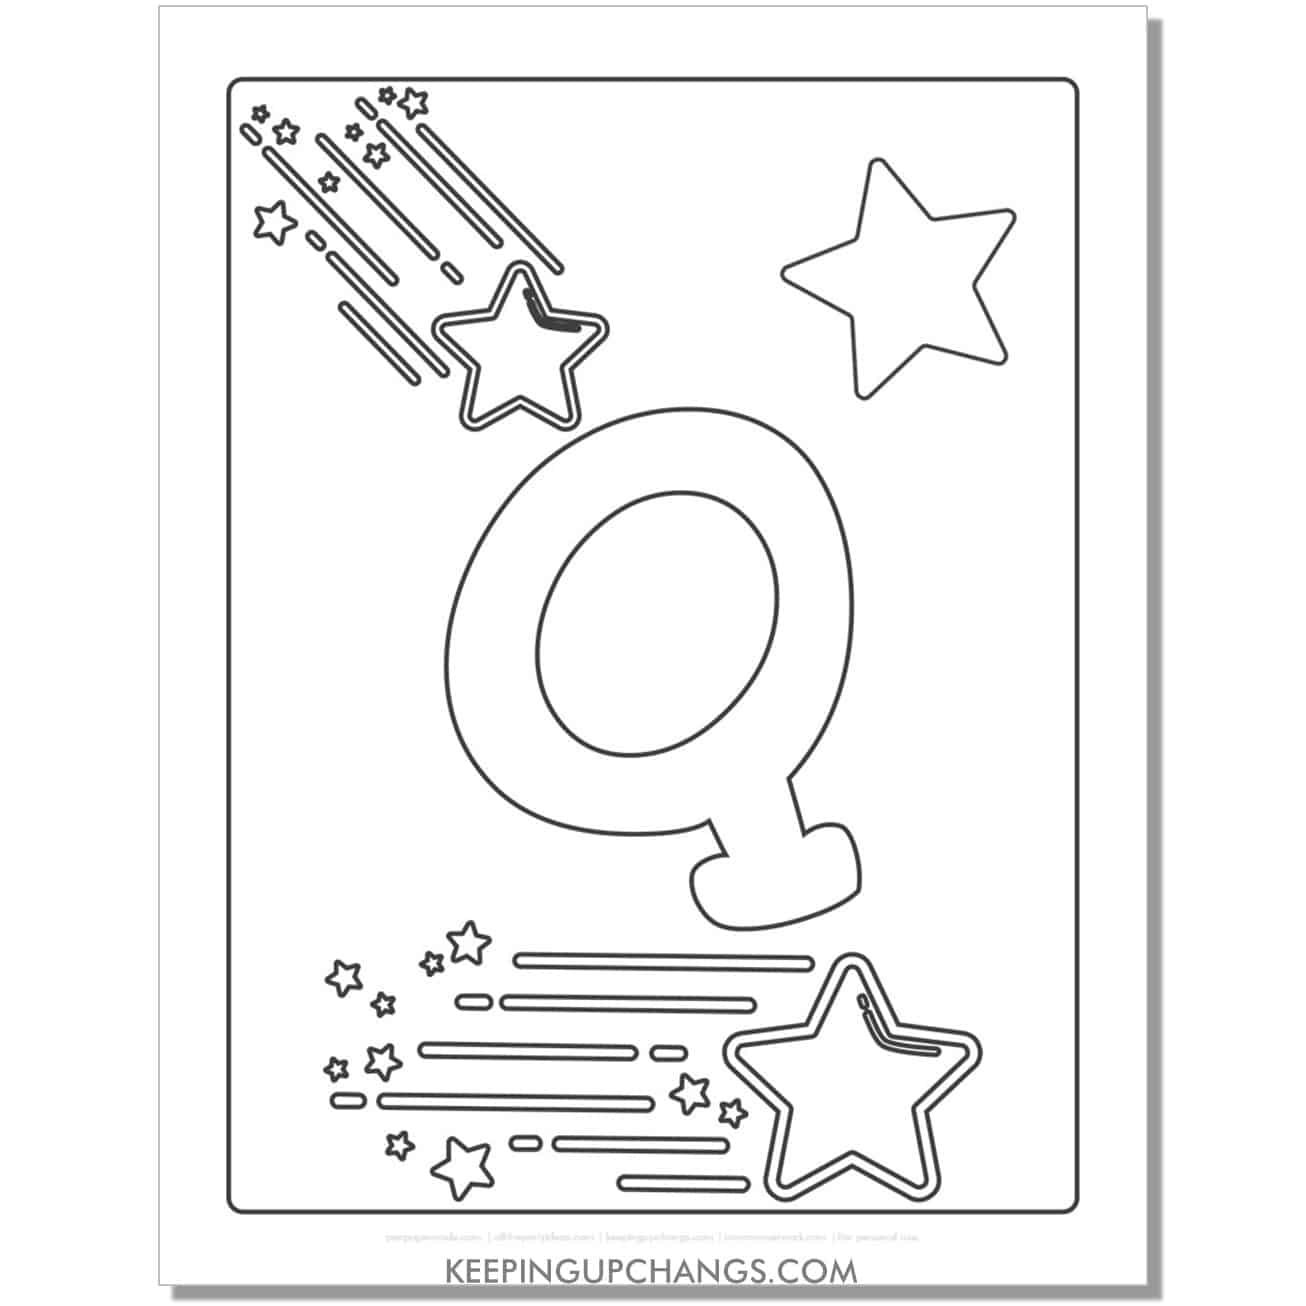 cool letter q to color with stars, space theme.